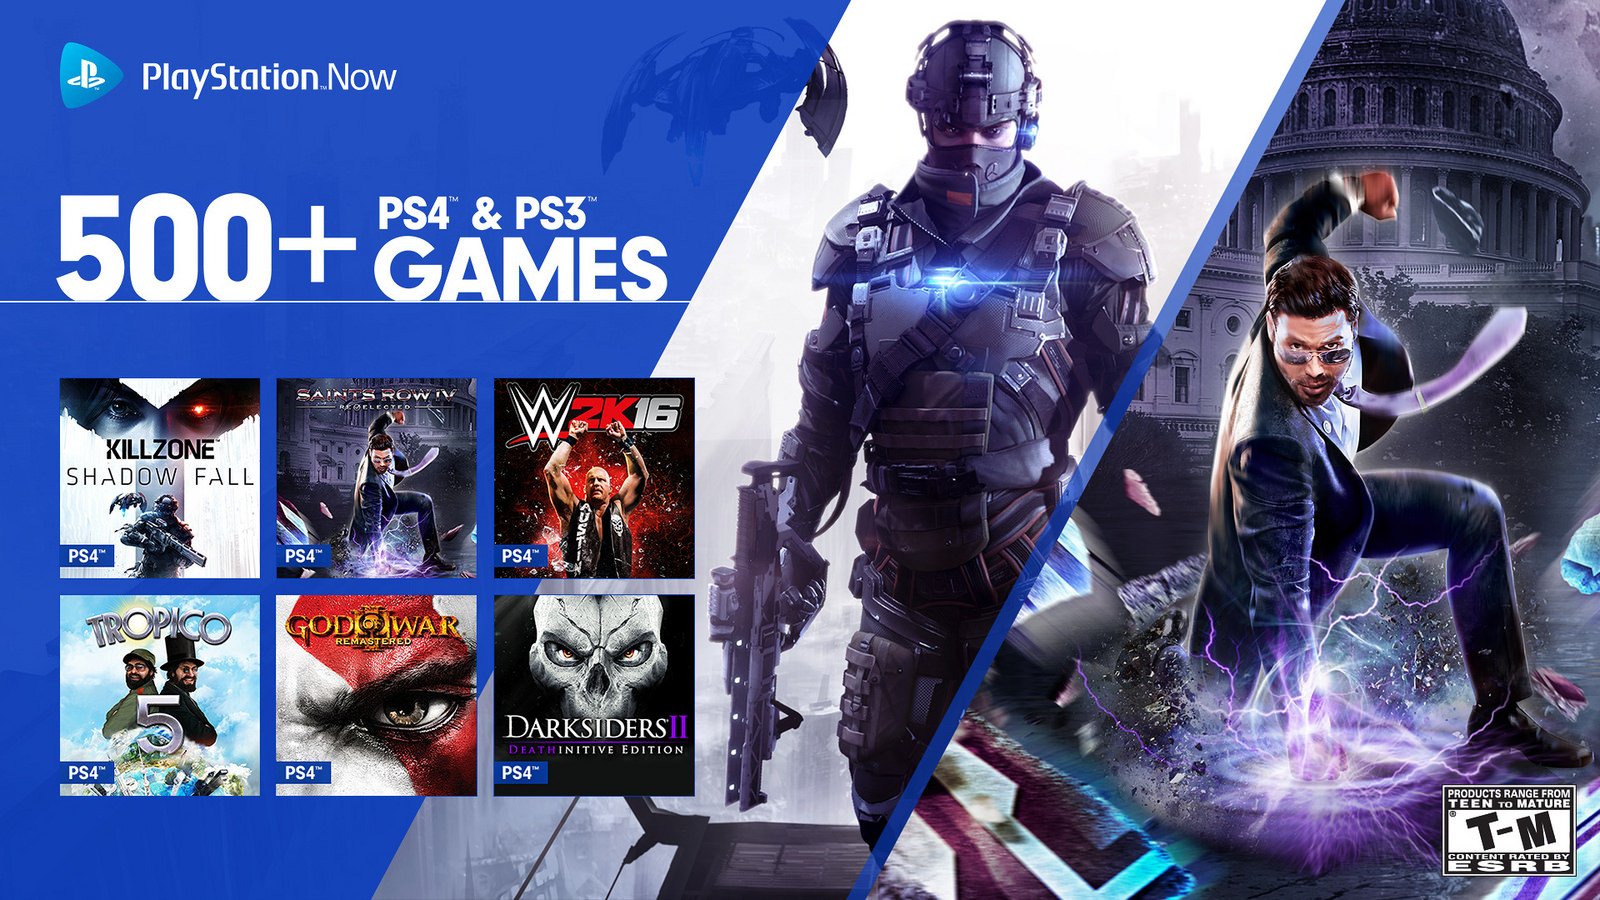 Pris Åh gud generation PlayStation on Twitter: "You can now stream PS4 games via PlayStation Now!  Full list of newly available titles: https://t.co/MBtopoW7eX  https://t.co/4OQTpqEZES" / Twitter